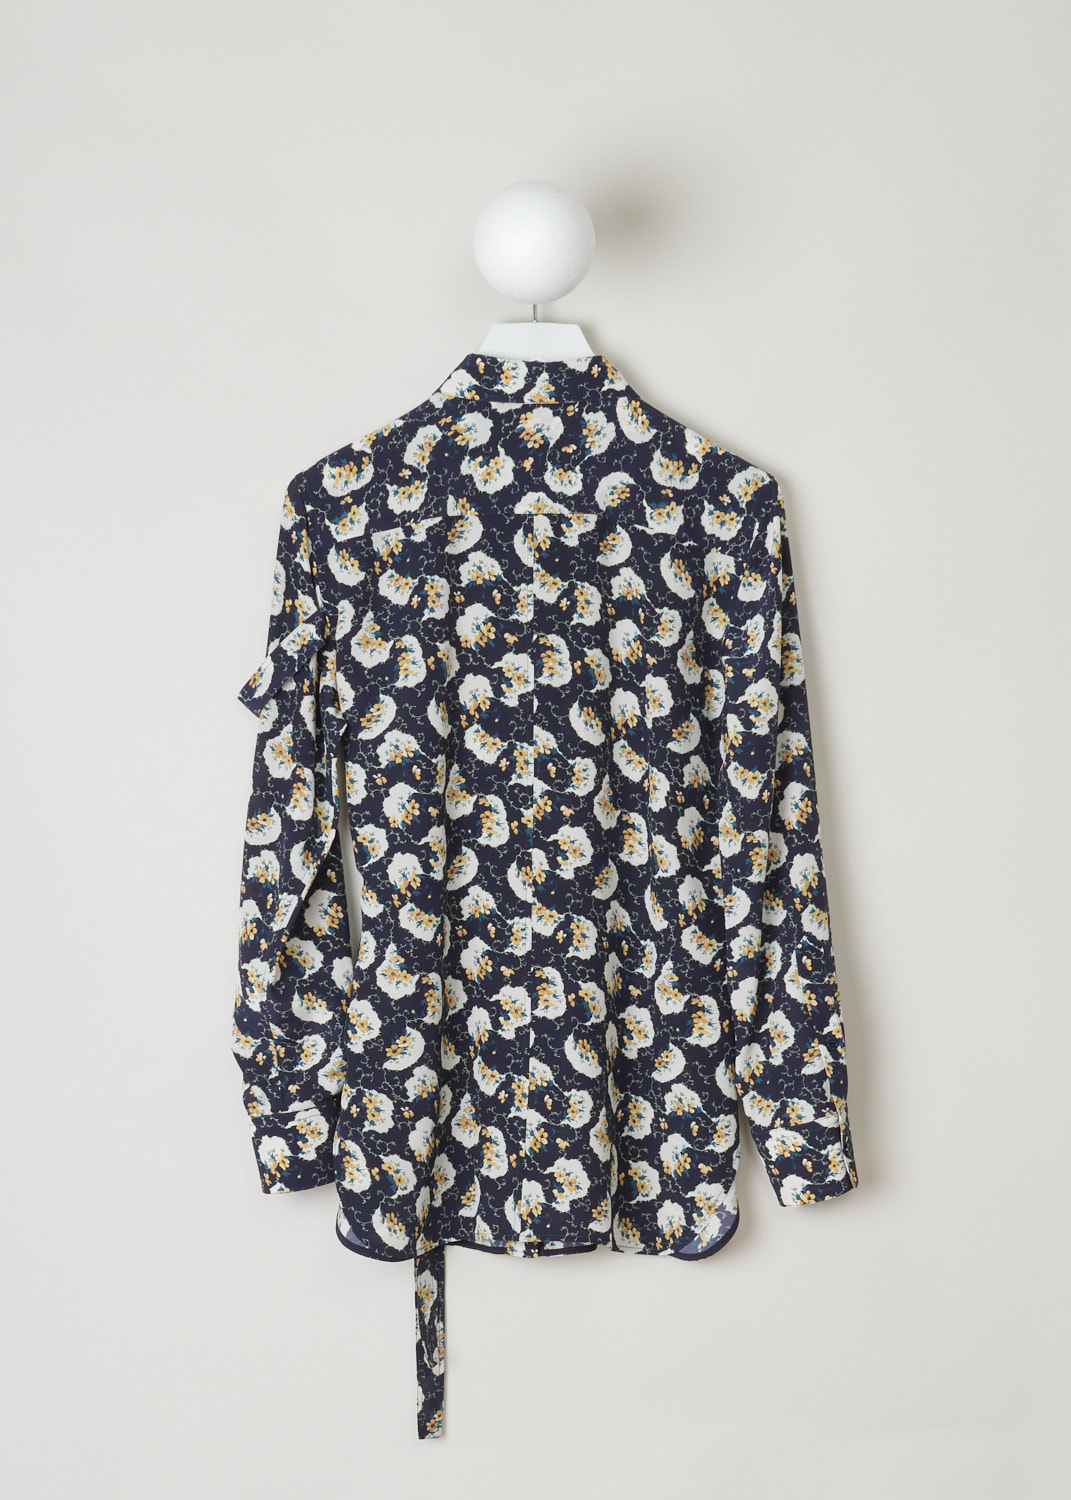 ChloÃ©, Navy blouse decorated with a colorful floral pattern, CHC20SHT40335476_476_dark_night_blue, blue, print, back, A silk crepe blouse adorned with a floral pattern in cream, yellow and green. Featuring a pointed collar which is accompanied by self-tie detail. a similar self-tie feature can be found on waist height and adds more excitement to this blouse. The fastening option here are the concealed buttons on the front.  